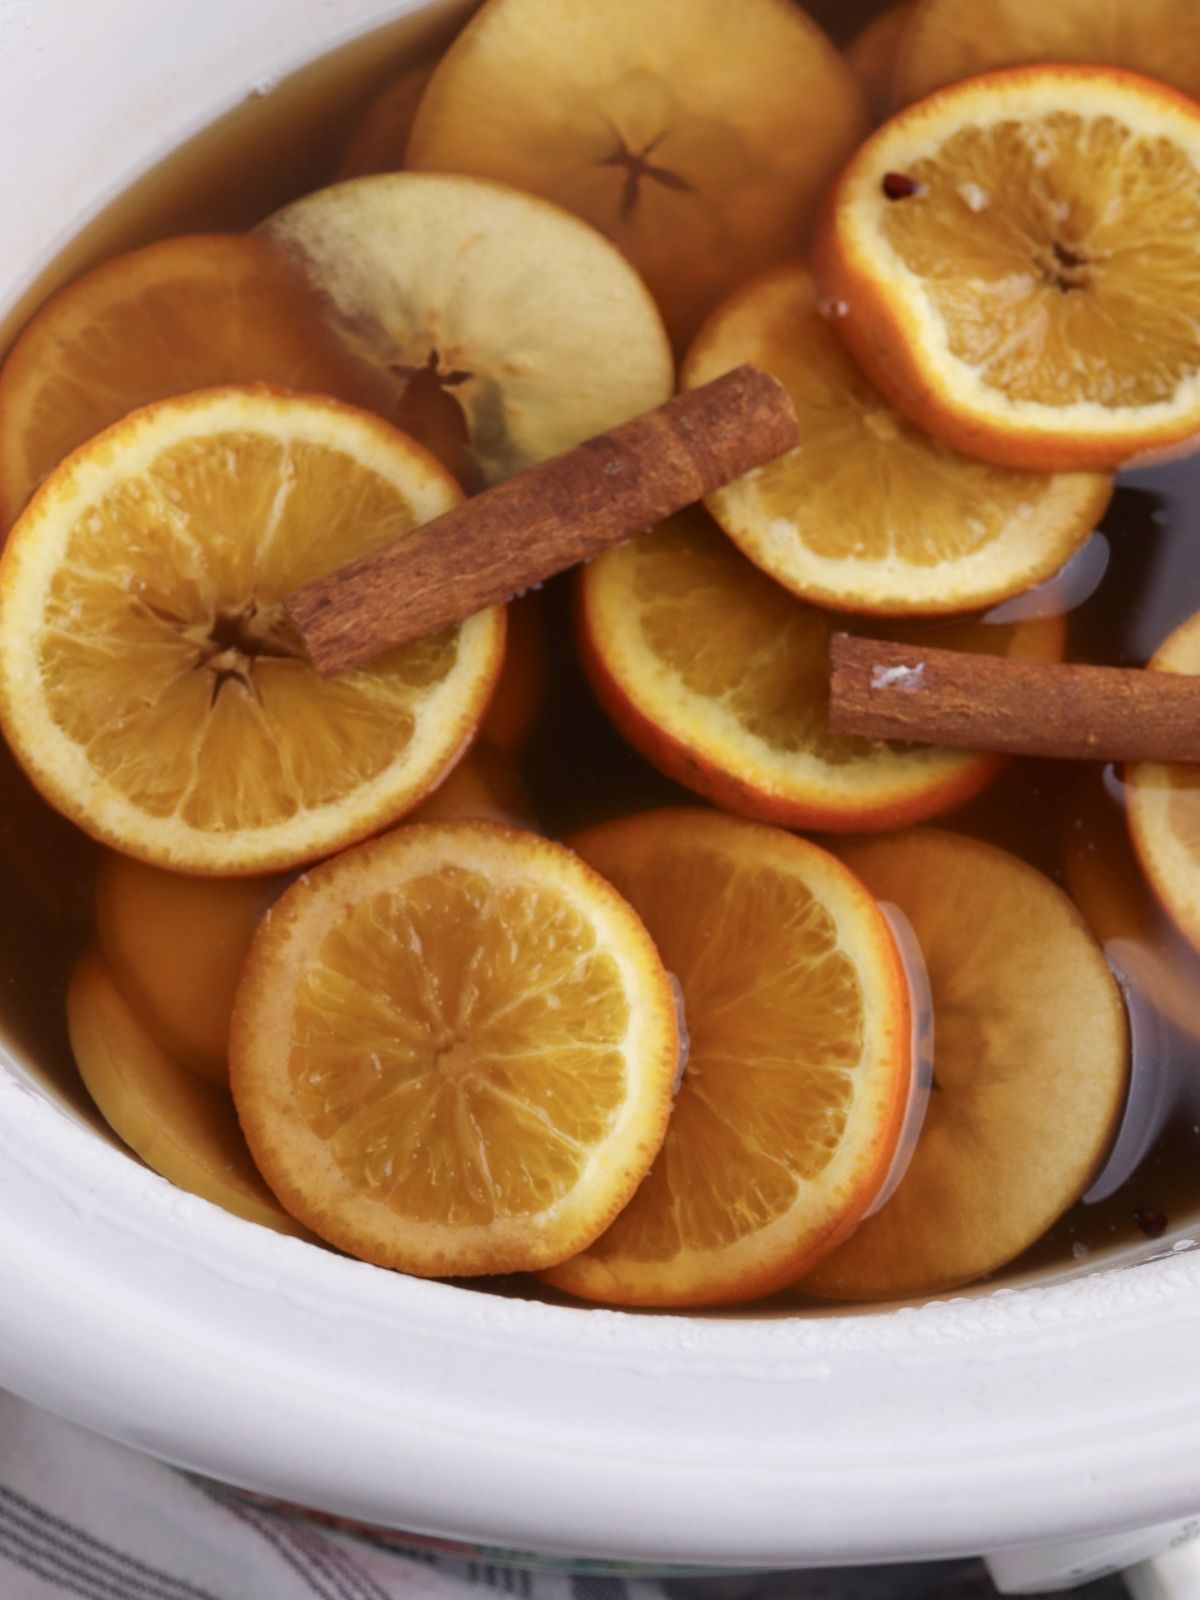 slow cooker cider with apple and orange slices with cinnamon sticks.